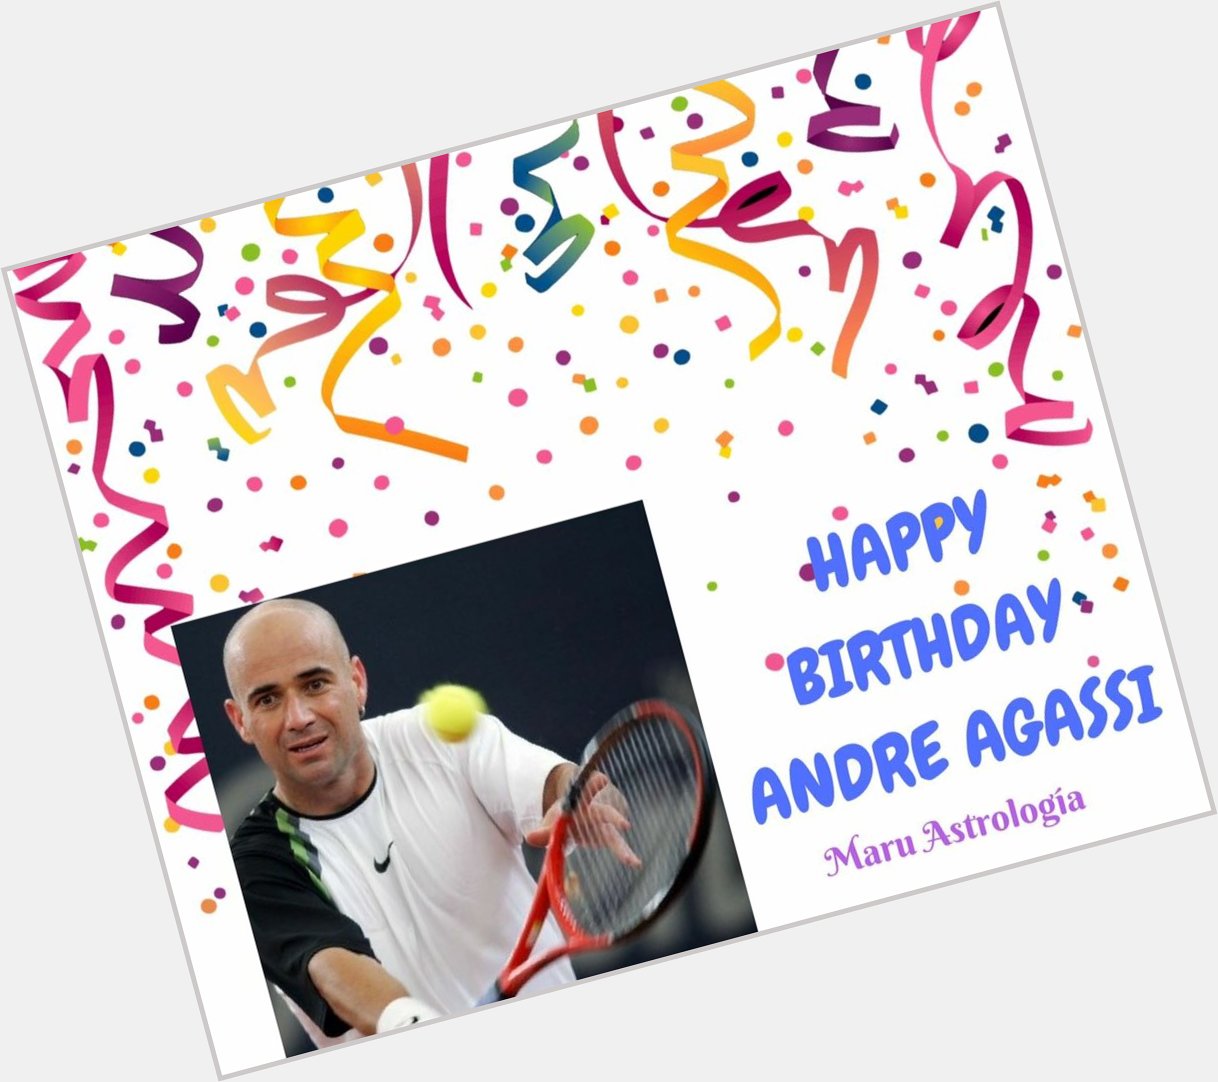 HAPPY BIRTHDAY ANDRE AGASSI!!!   